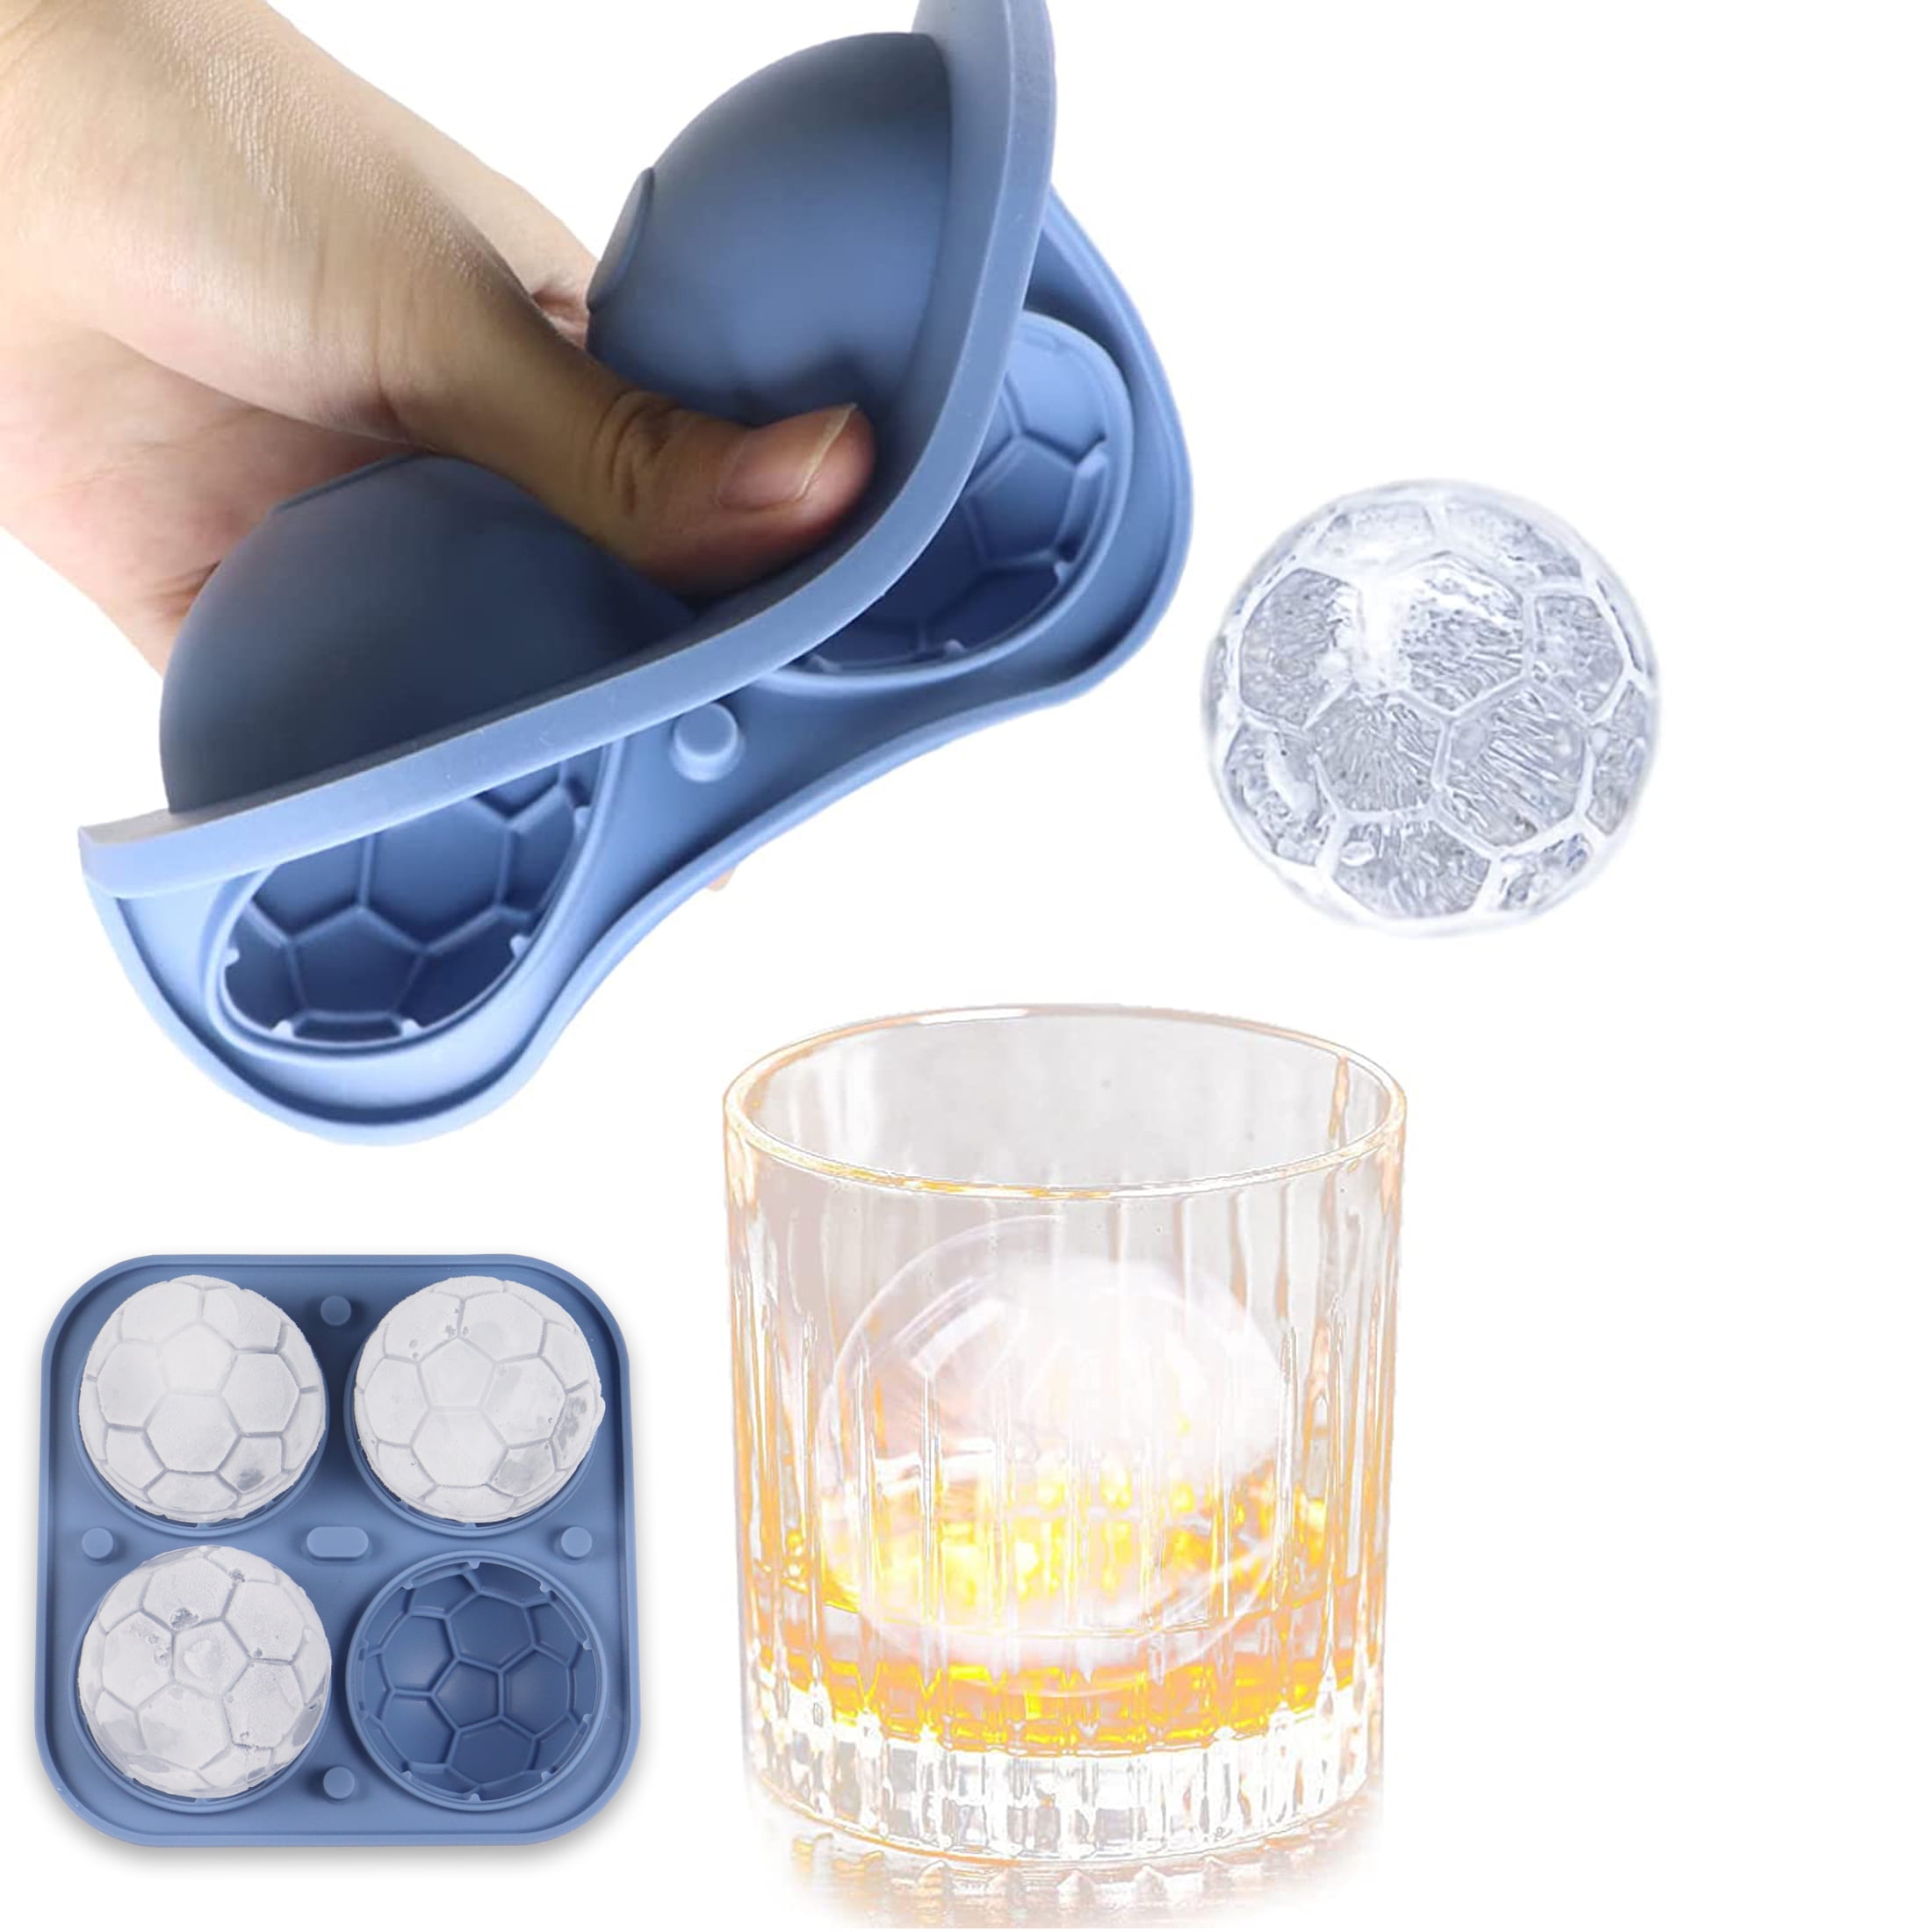 Large Rose Ice Cube Mold 2.5 Inch, Bongpuda Silicone Ice Molds Fun Shapes  Flower, 4 Cavity Cute Ice Ball Maker, Large Ice Cube Trays For Chilling